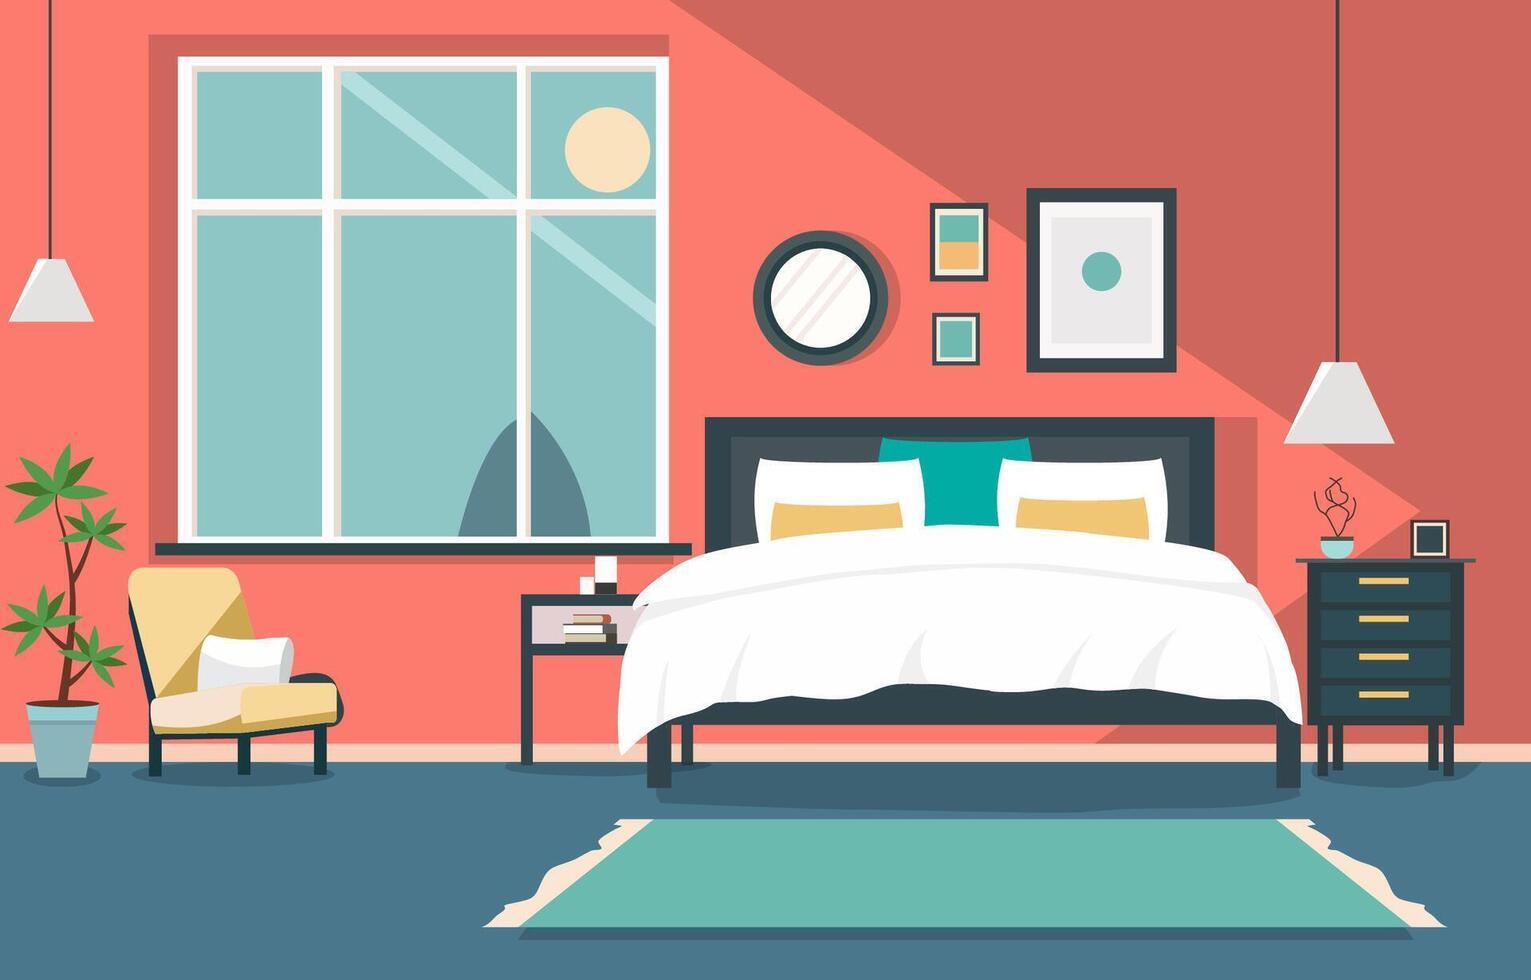 Flat Design of Bedroom Interior with Bed Furniture and Window in Home 01 vector